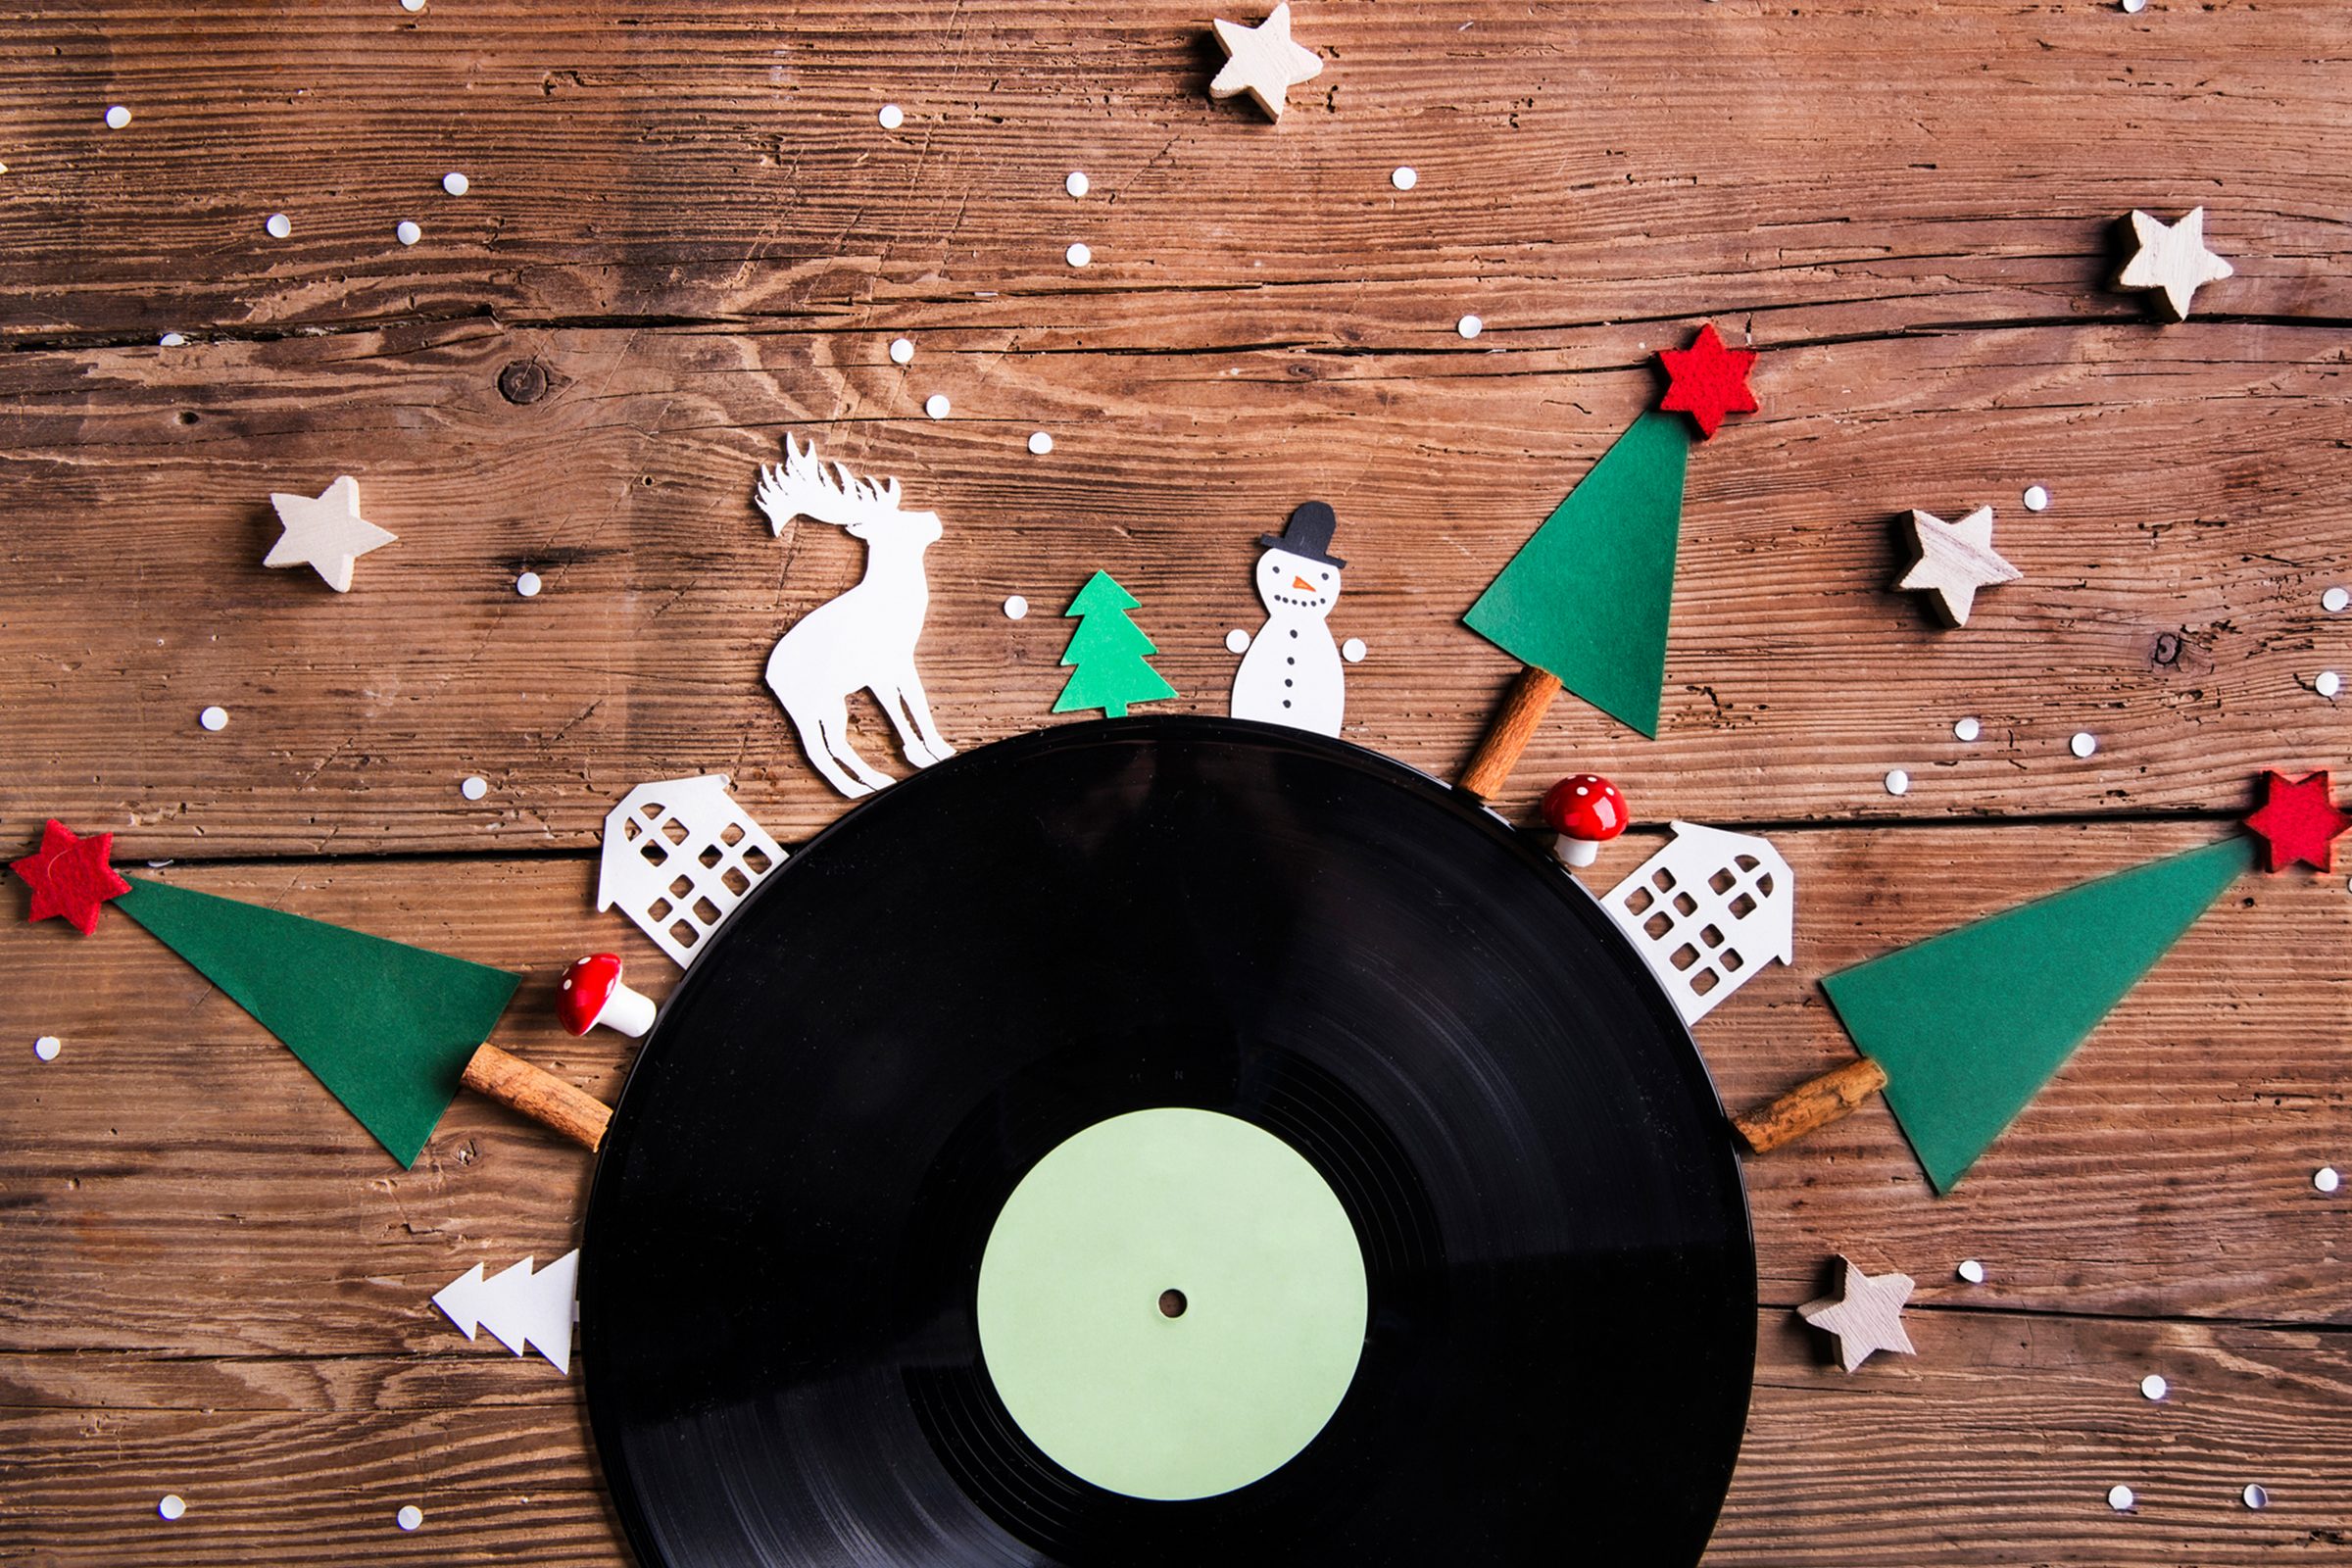 10 Essential Christmas Albums, From Motown to 'Charlie Brown